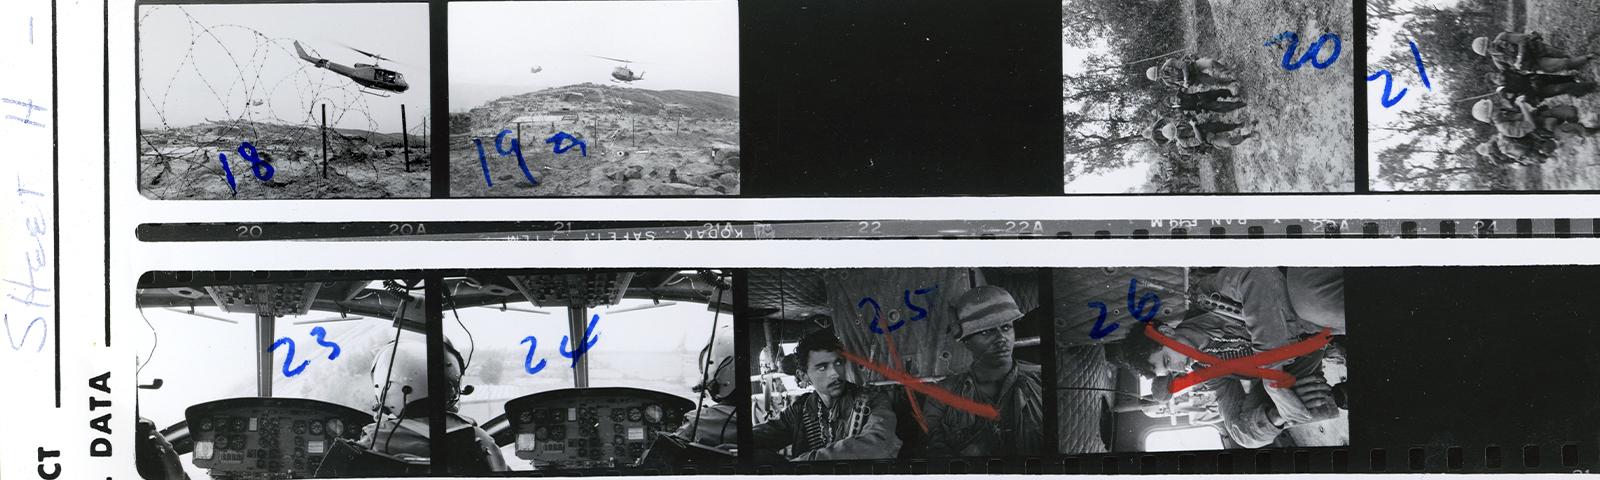 cropped detail of a contact sheet from Overseas Weekly